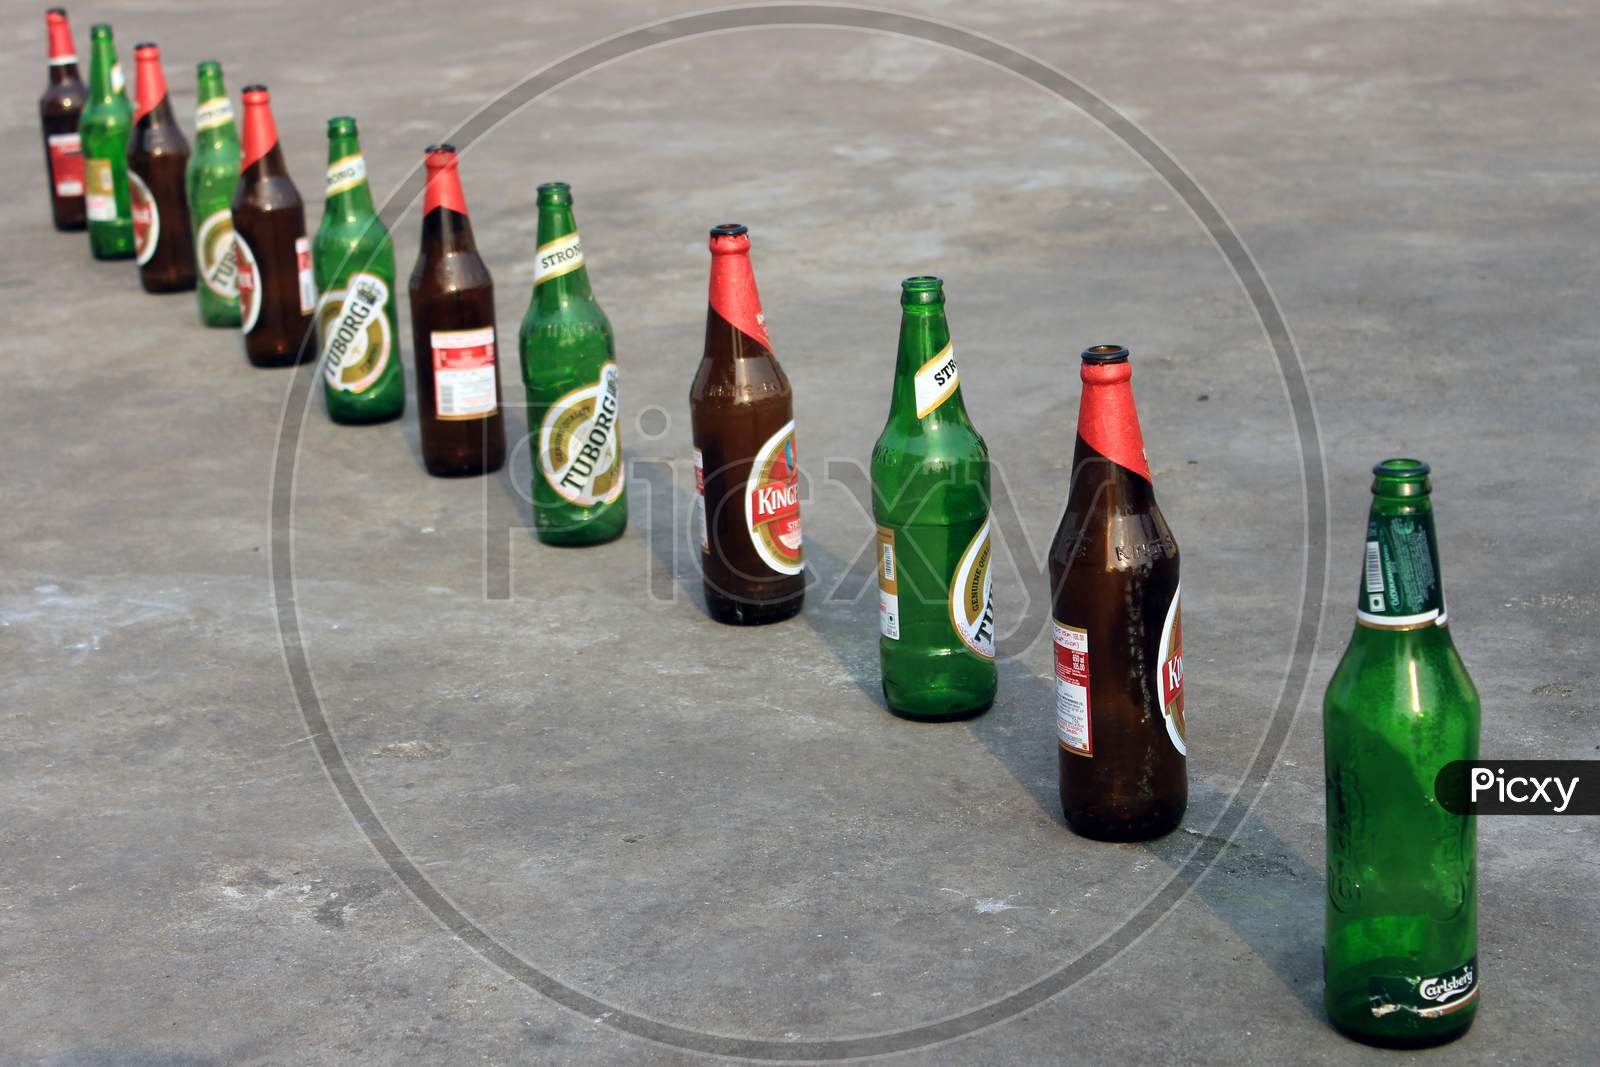 Alcohol or Beer Bottles on a Beach Shore